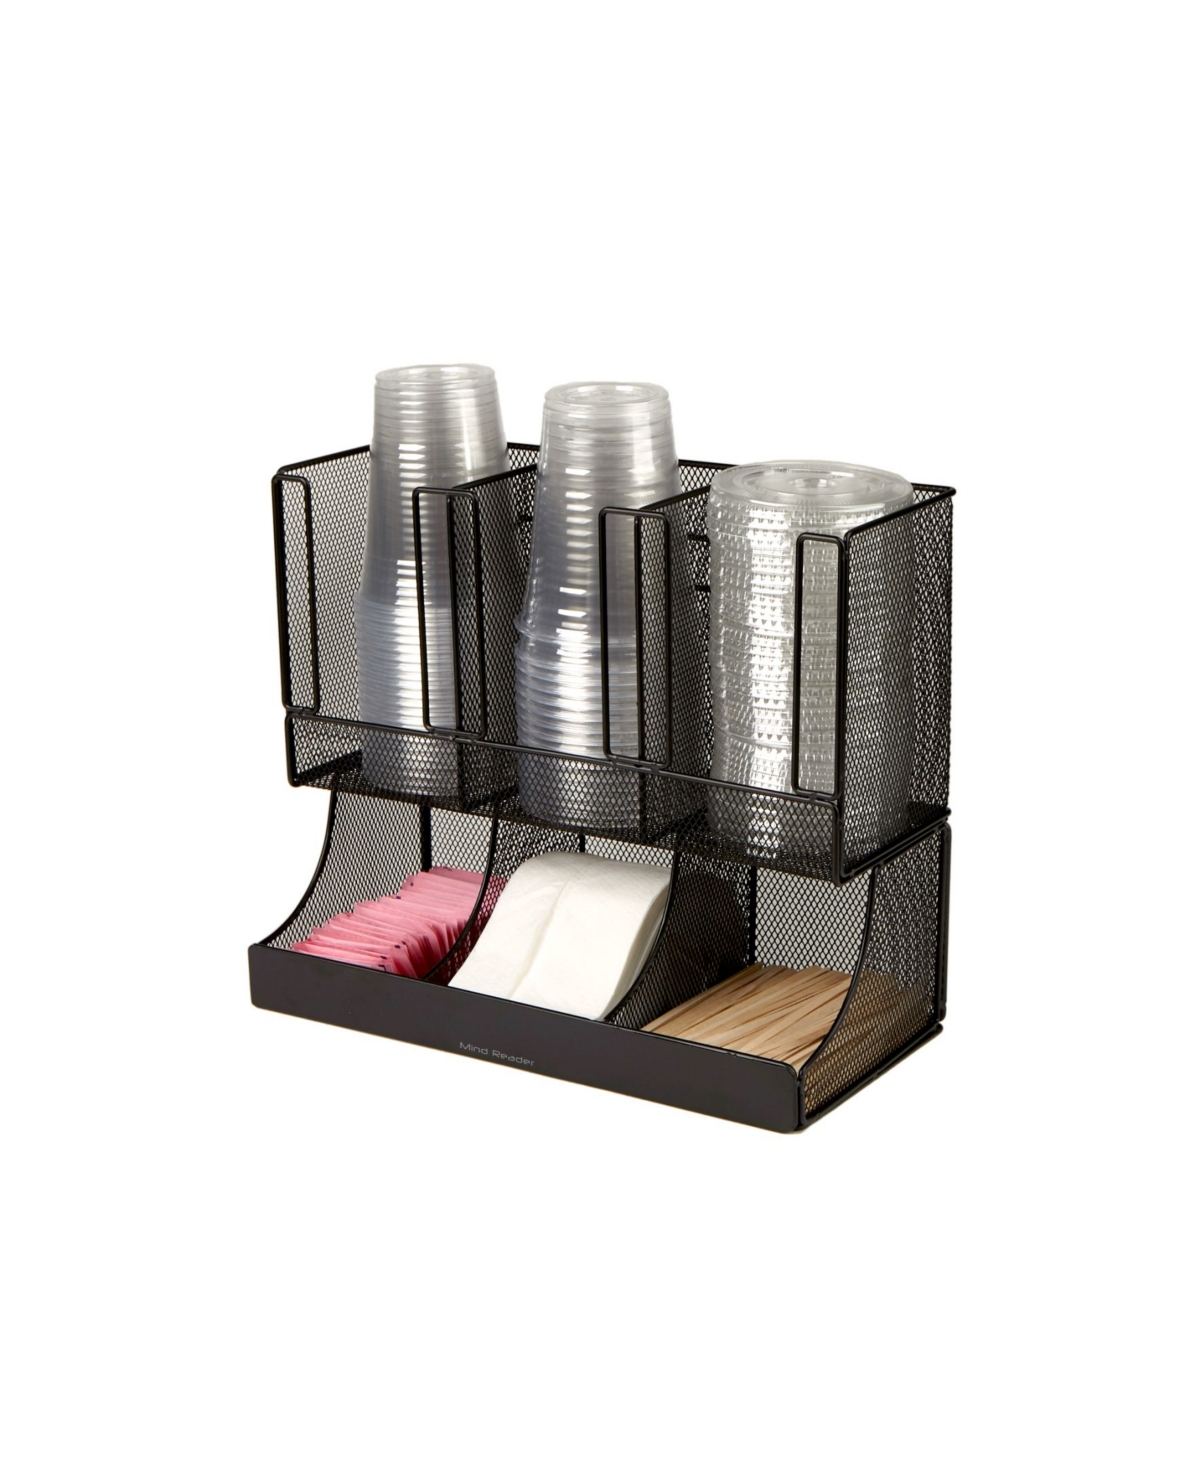 6 Compartment Upright Breakroom Coffee Condiment and Cup Storage Organizer - Black